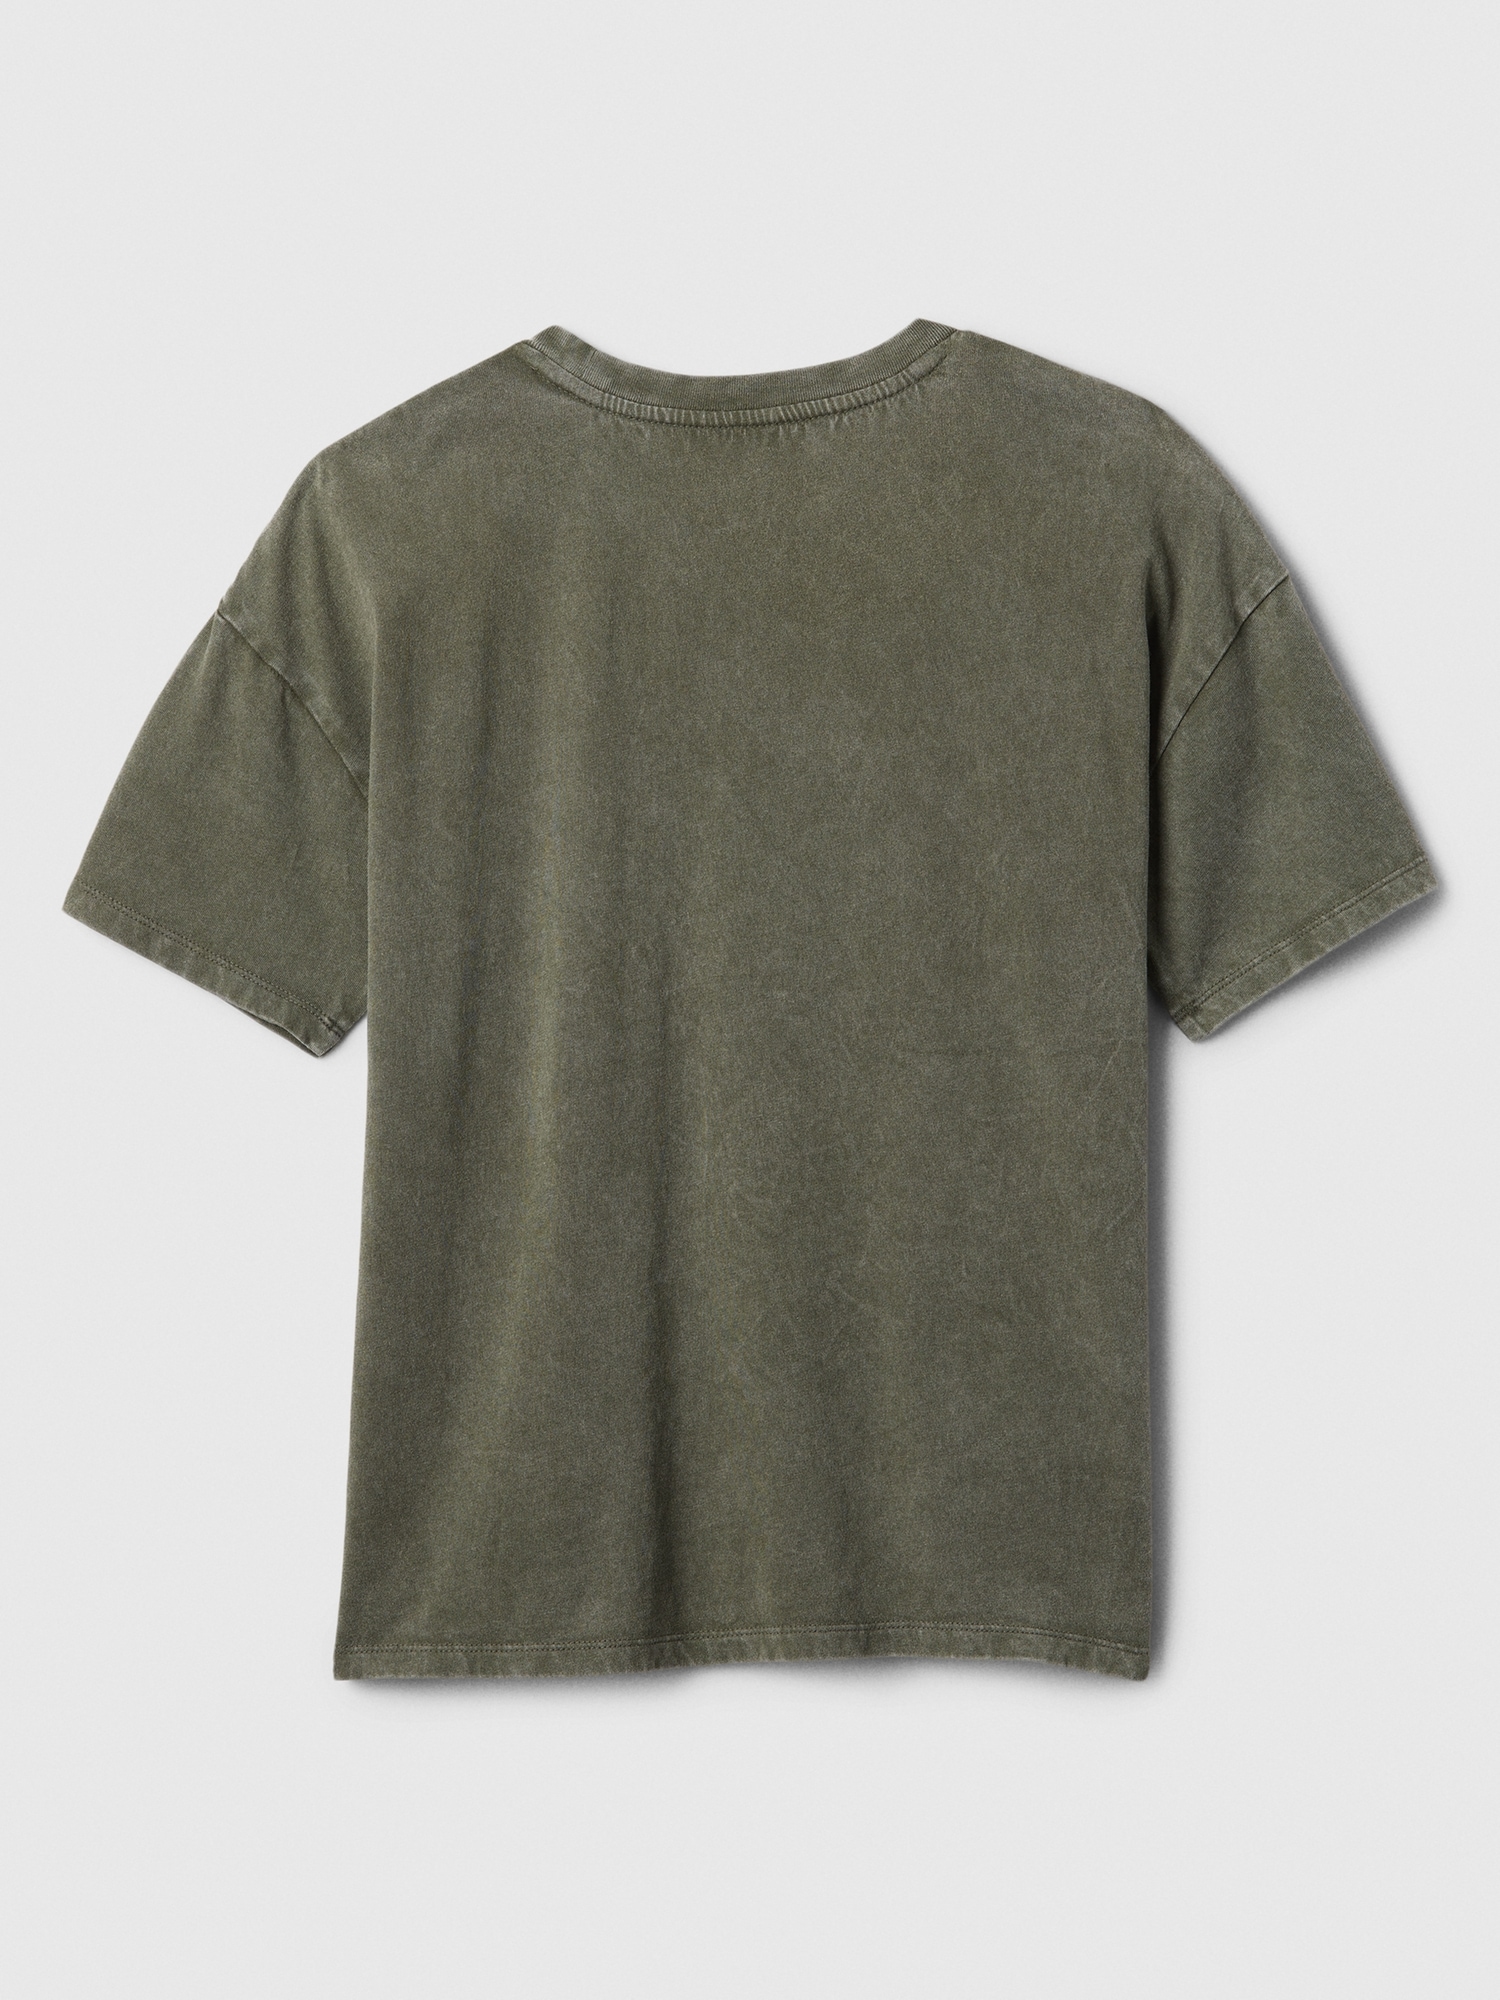 Kids Relaxed Washed-Jersey T-Shirt | Gap Factory